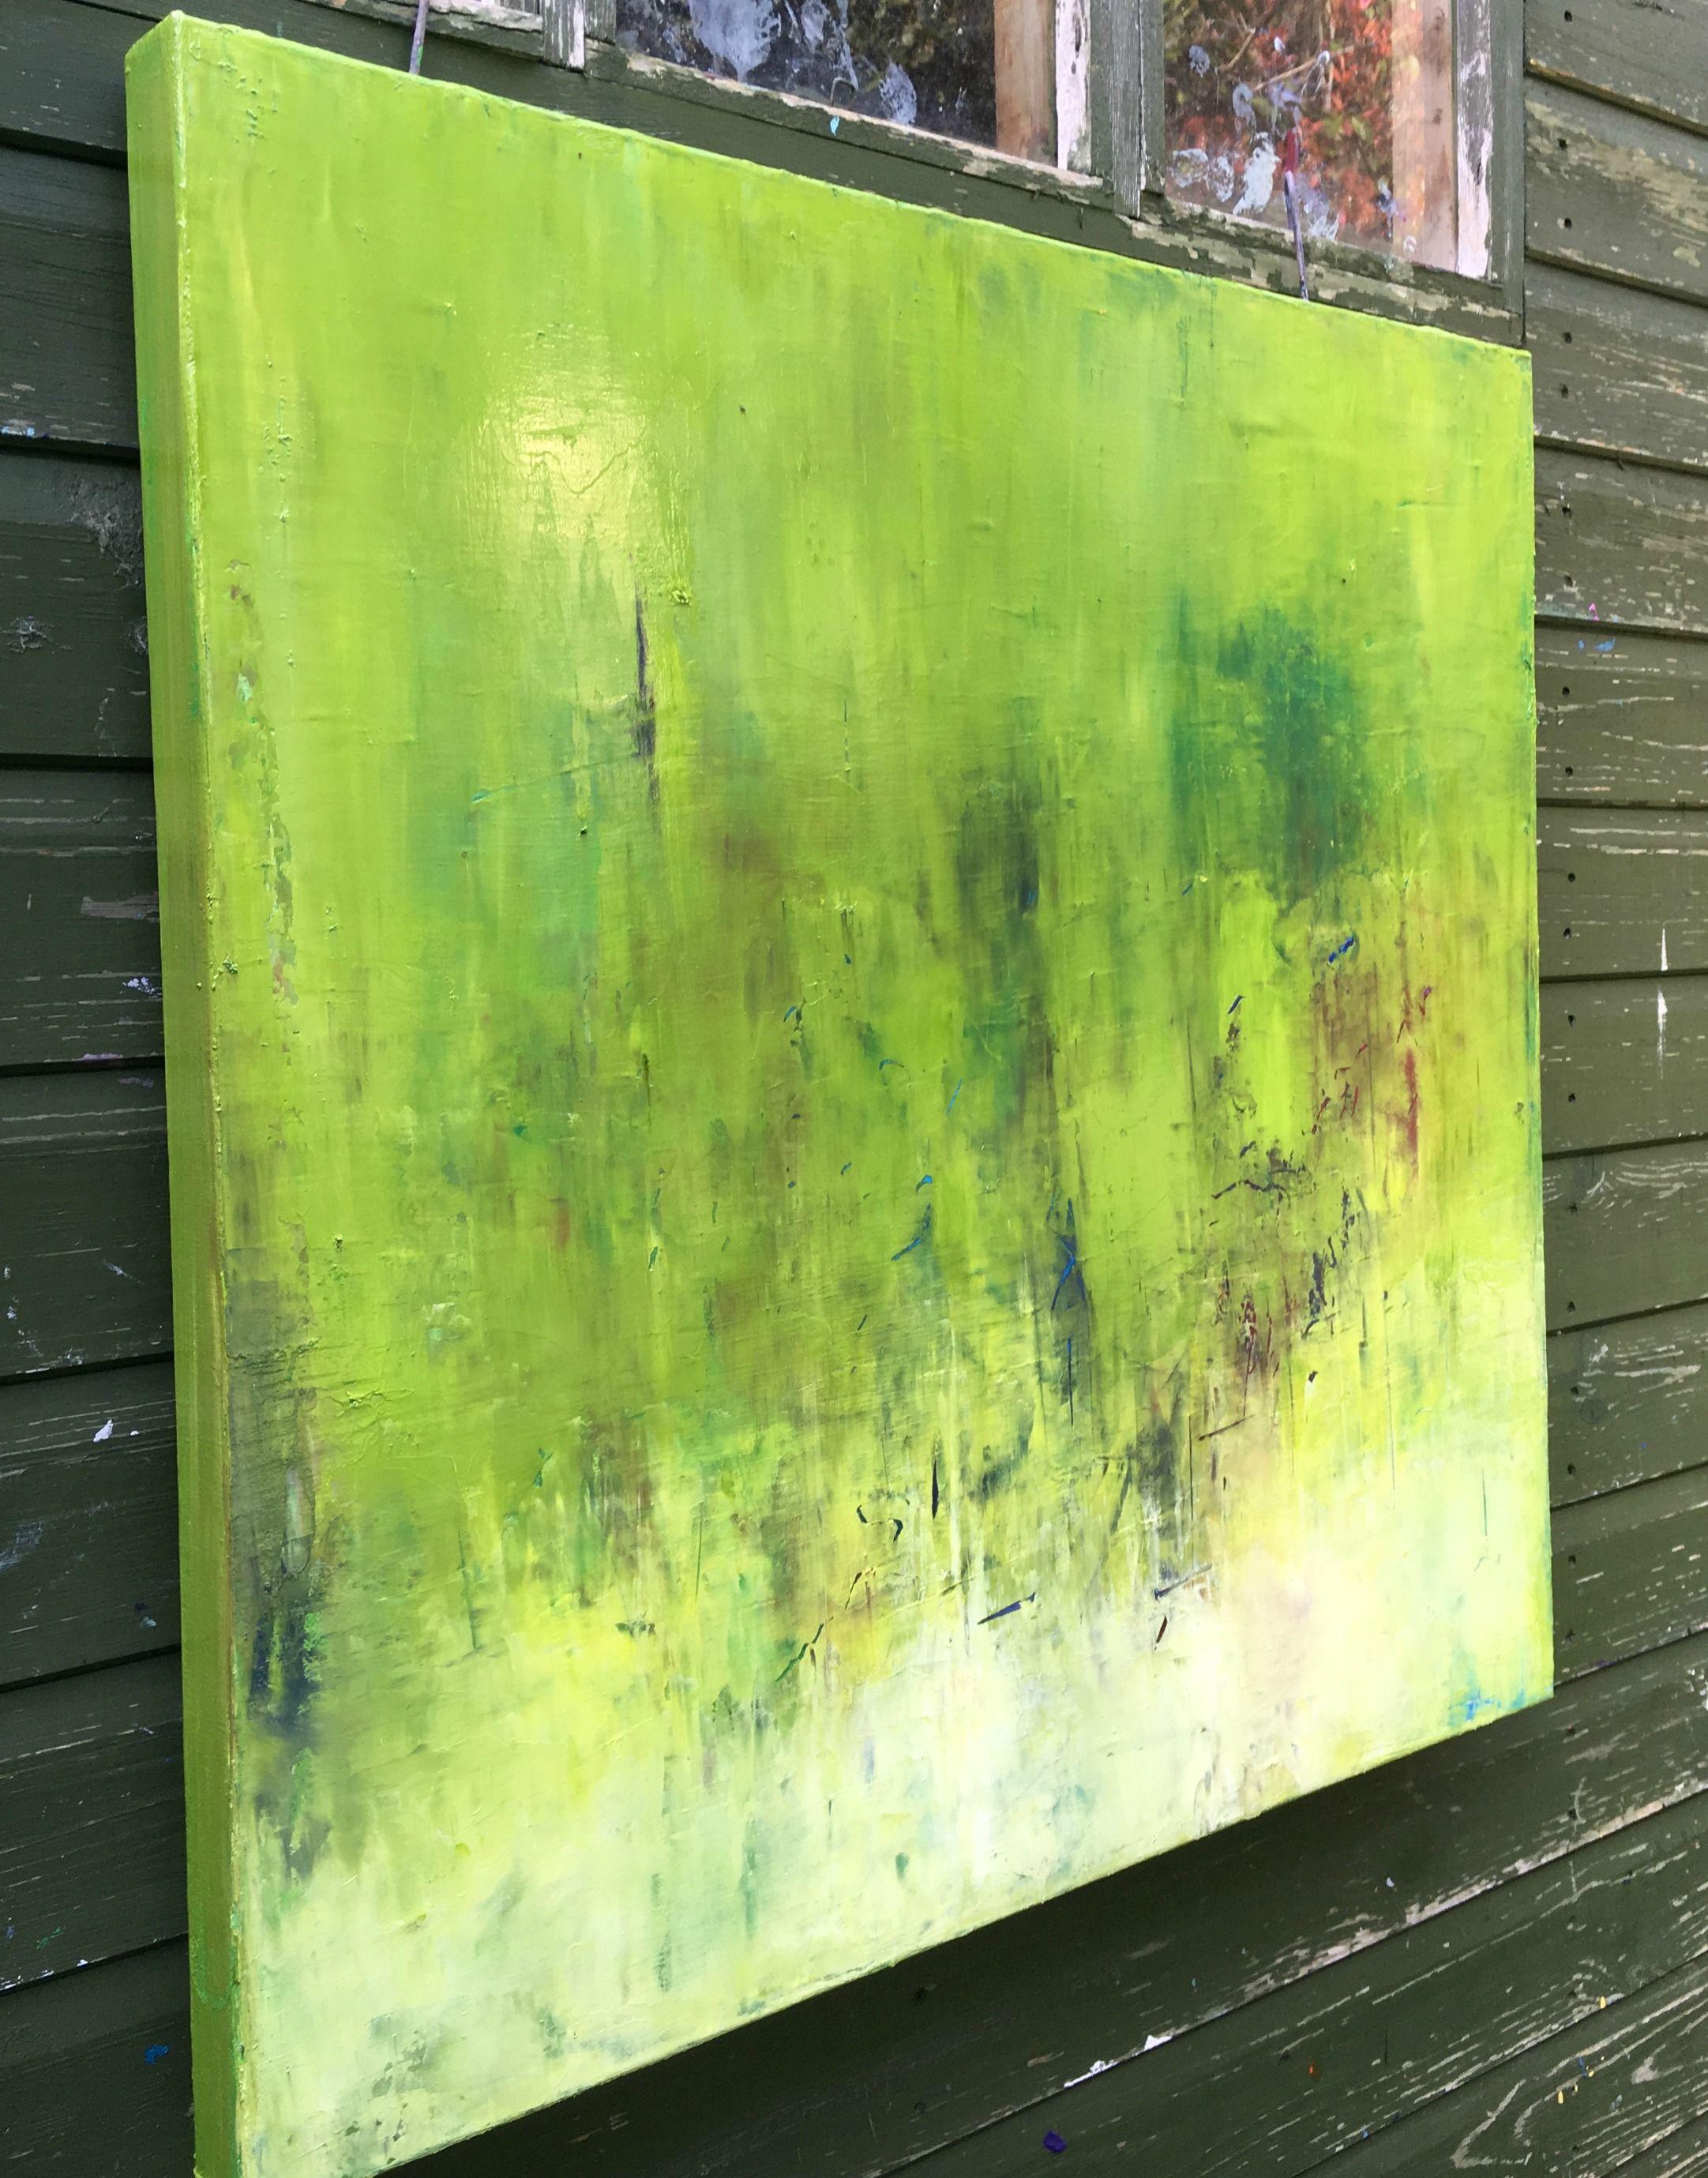 An abstract impasto oil painting built over many layers of olive green, yellow and white oil paint. Liquin has been added to the paint to add a slight gloss.     Paint has been manipulated with a palette knife distributing the oils, taking off